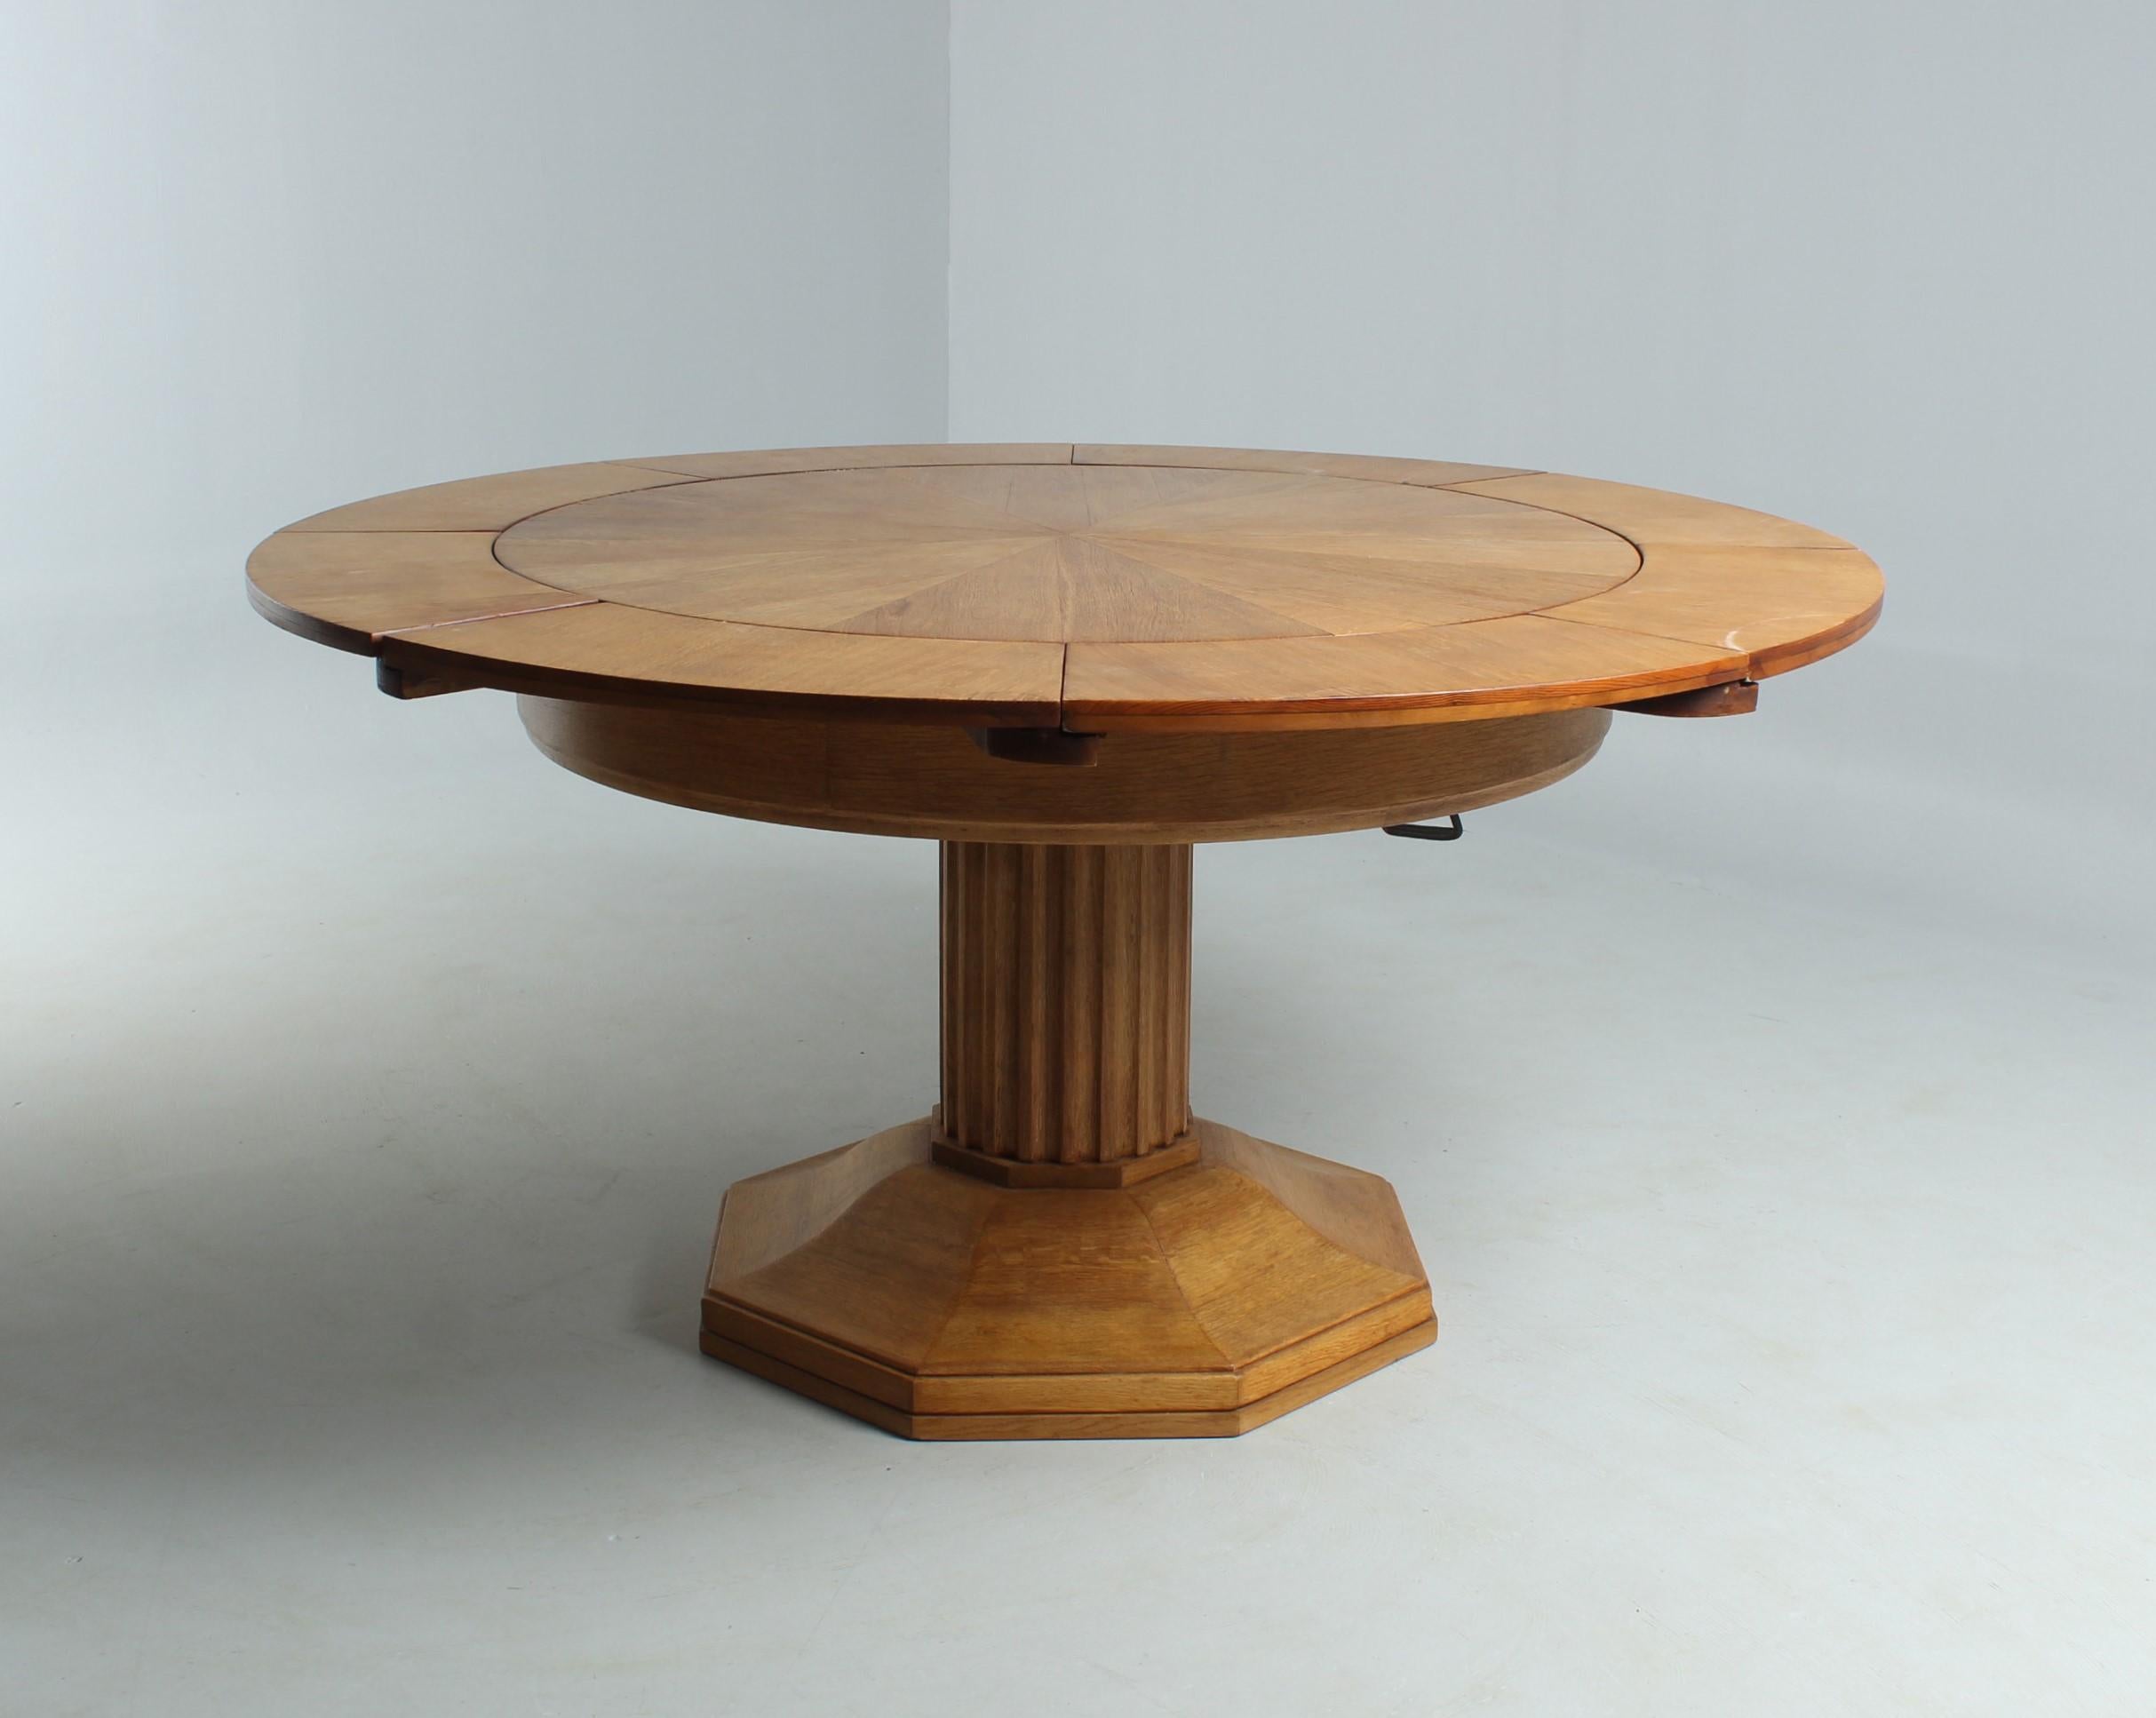 Art Deco 1920s Legnica Turning Table, round to round extendable Dining Table 